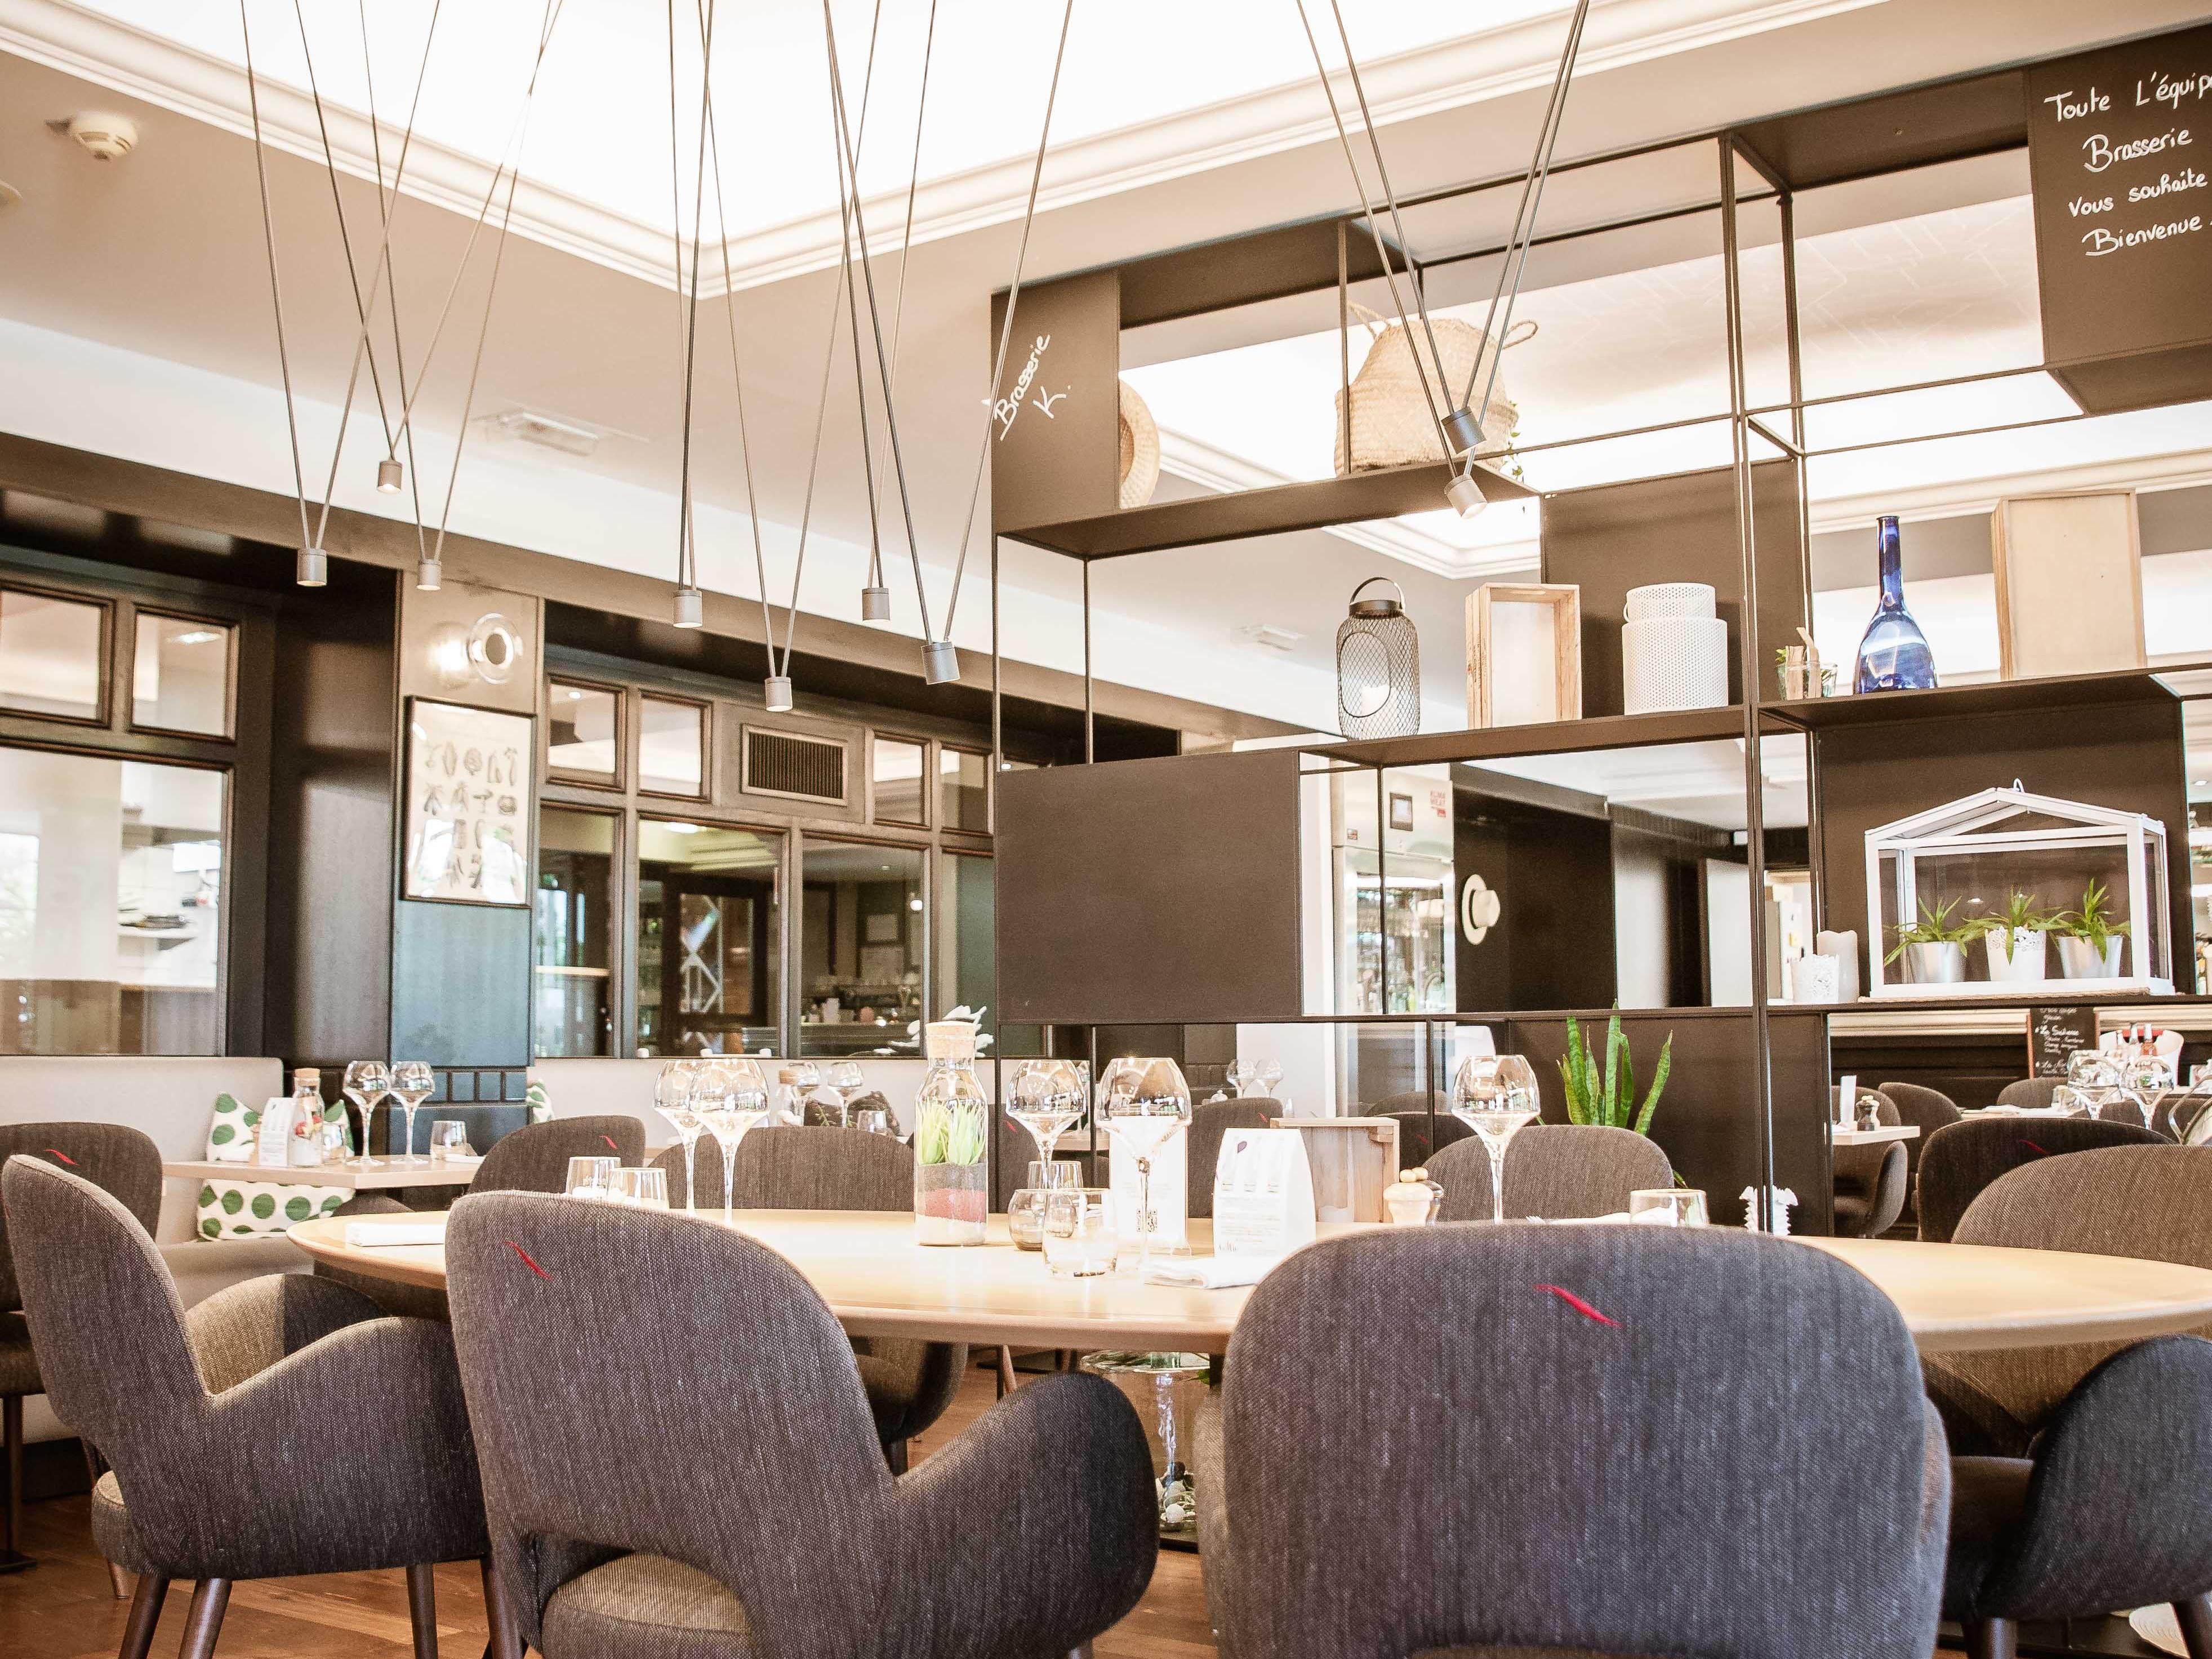 enjoy a nice diner or lunch in our Brasserie during your stay